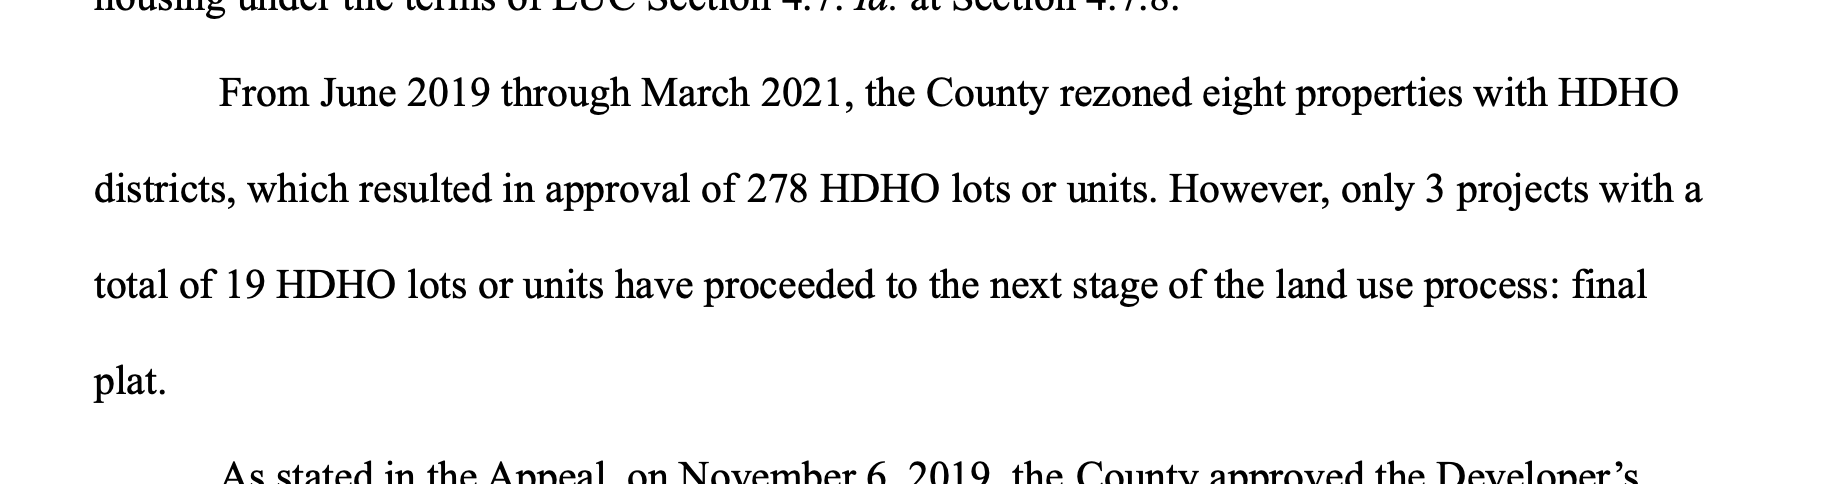 selected text from the linked document claiming that "only 3 projects with a total of 19 HDHO lots or units have proceeded to the next stage of the land use process."